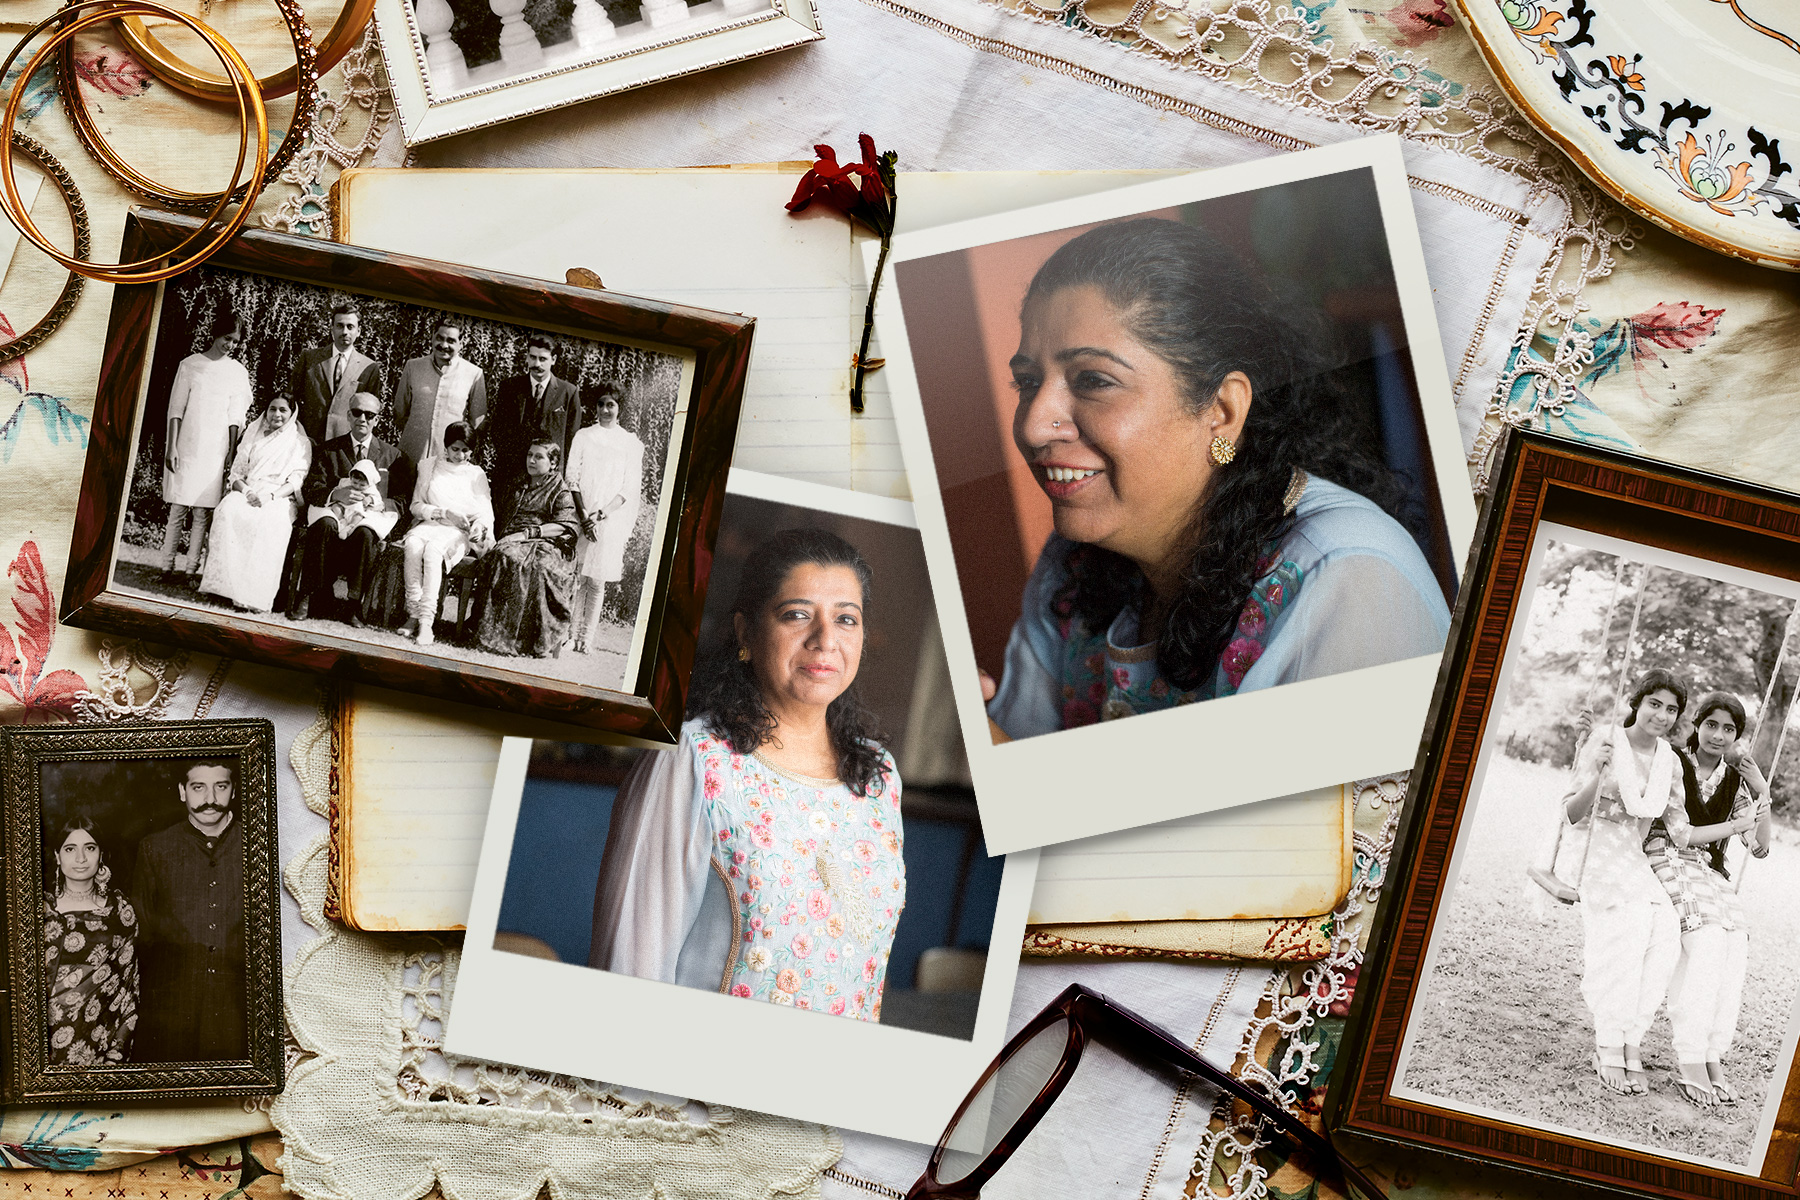 Photographs of Asma Khan on a background of family affects on a table